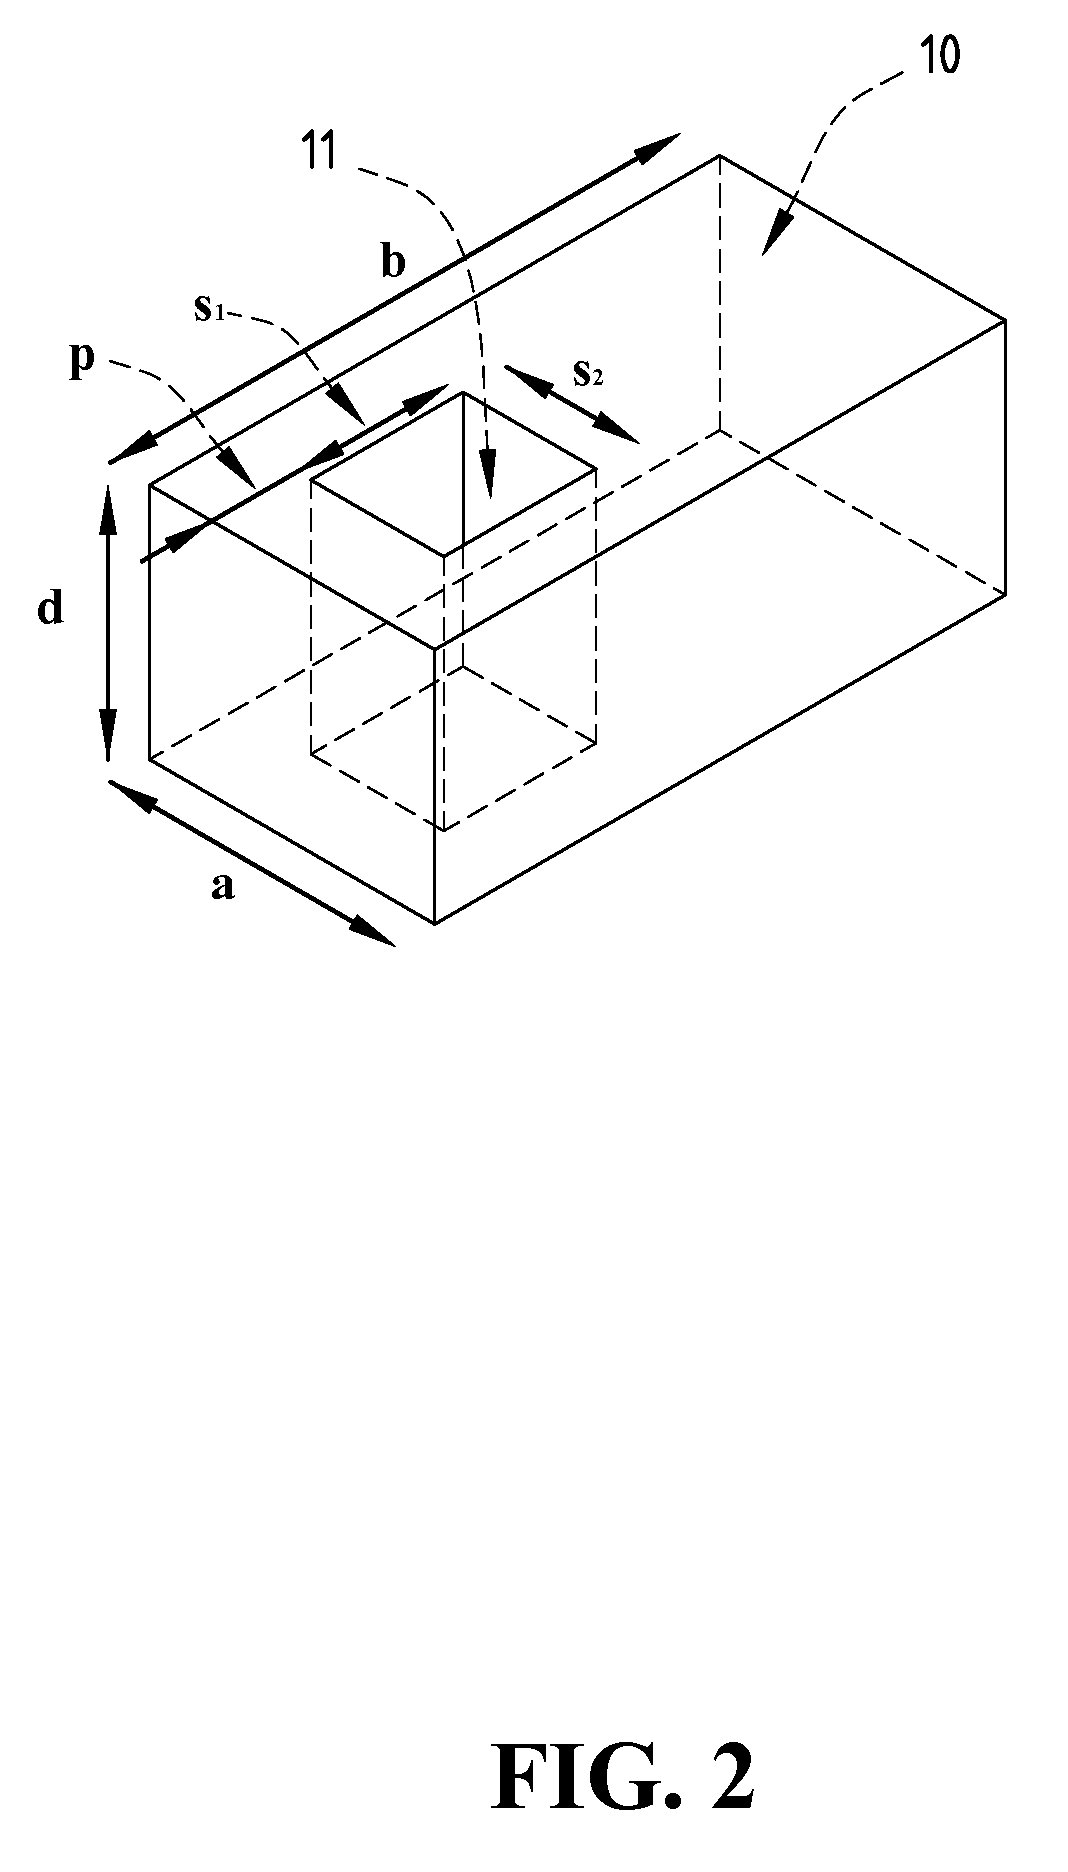 Dielectric resonator antenna with a caved well